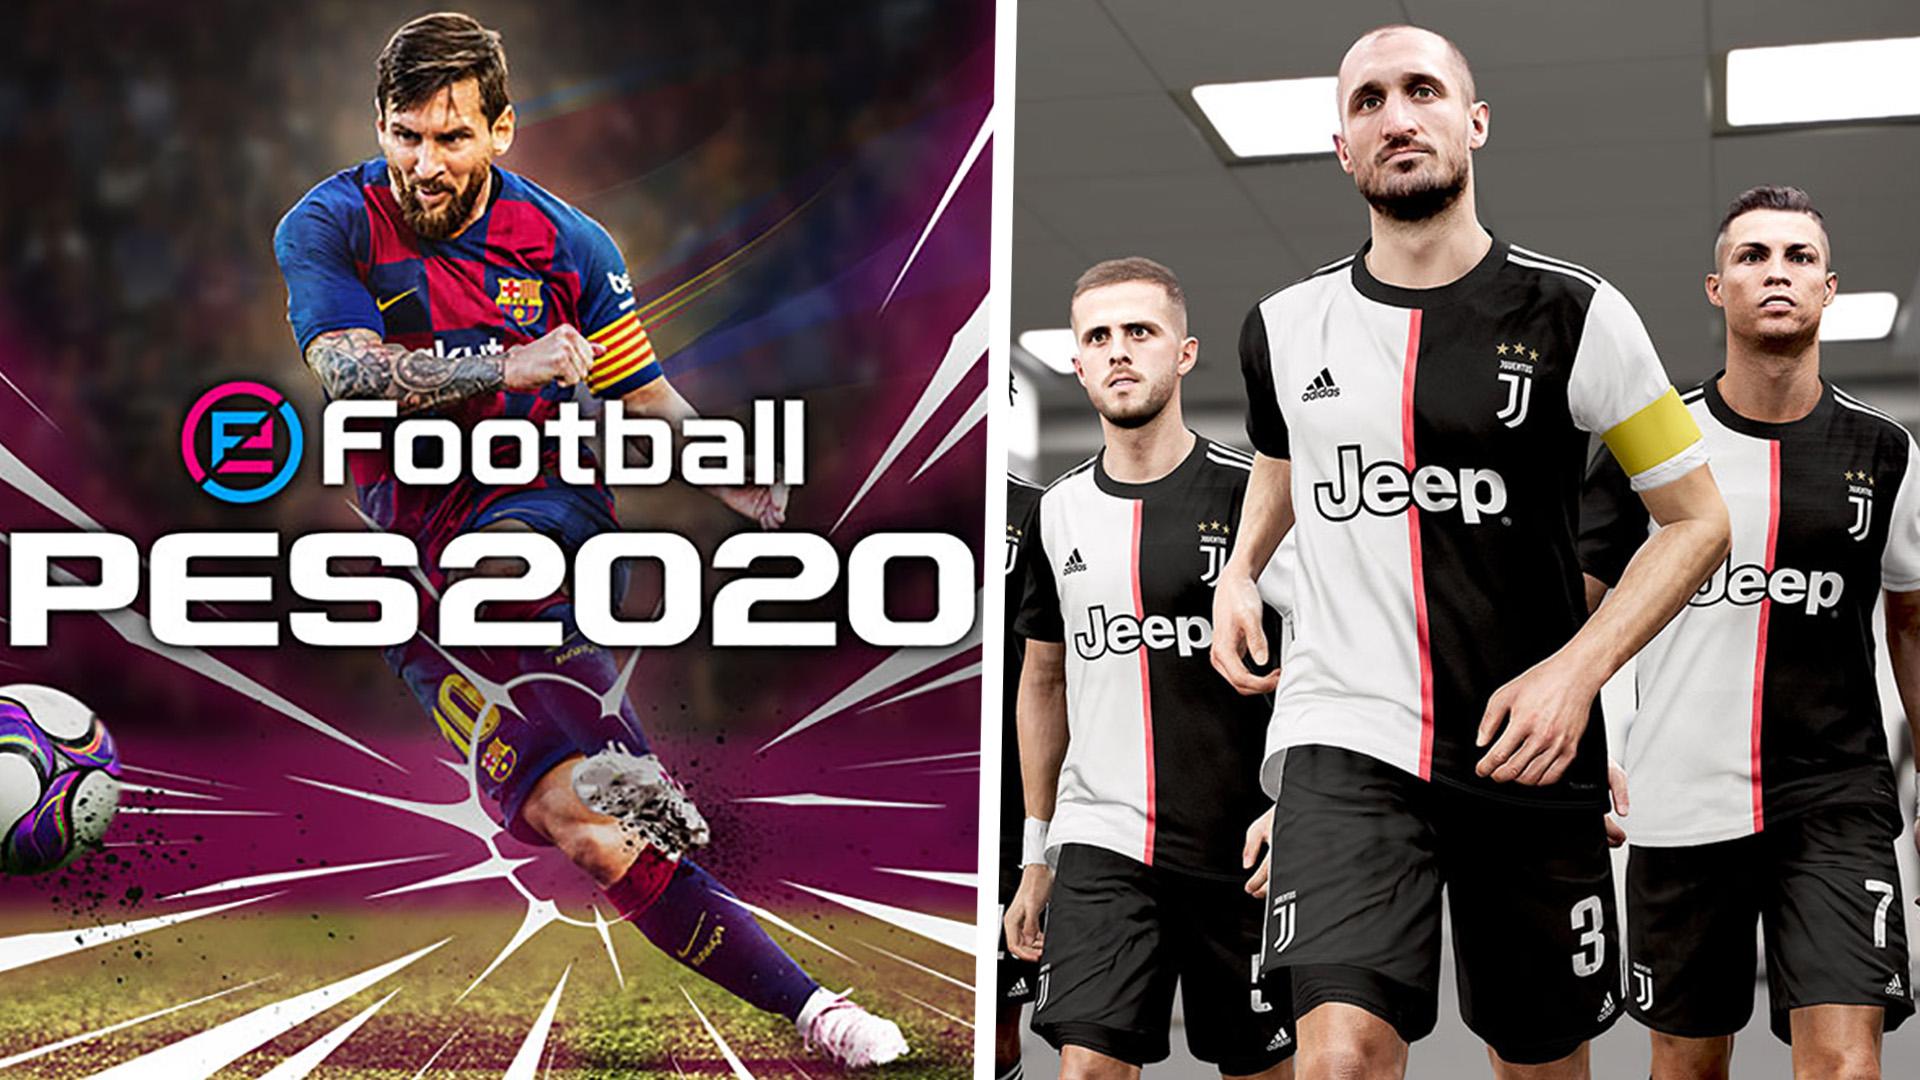 PES 2020: Release date, demo, licenses, cover stars & all